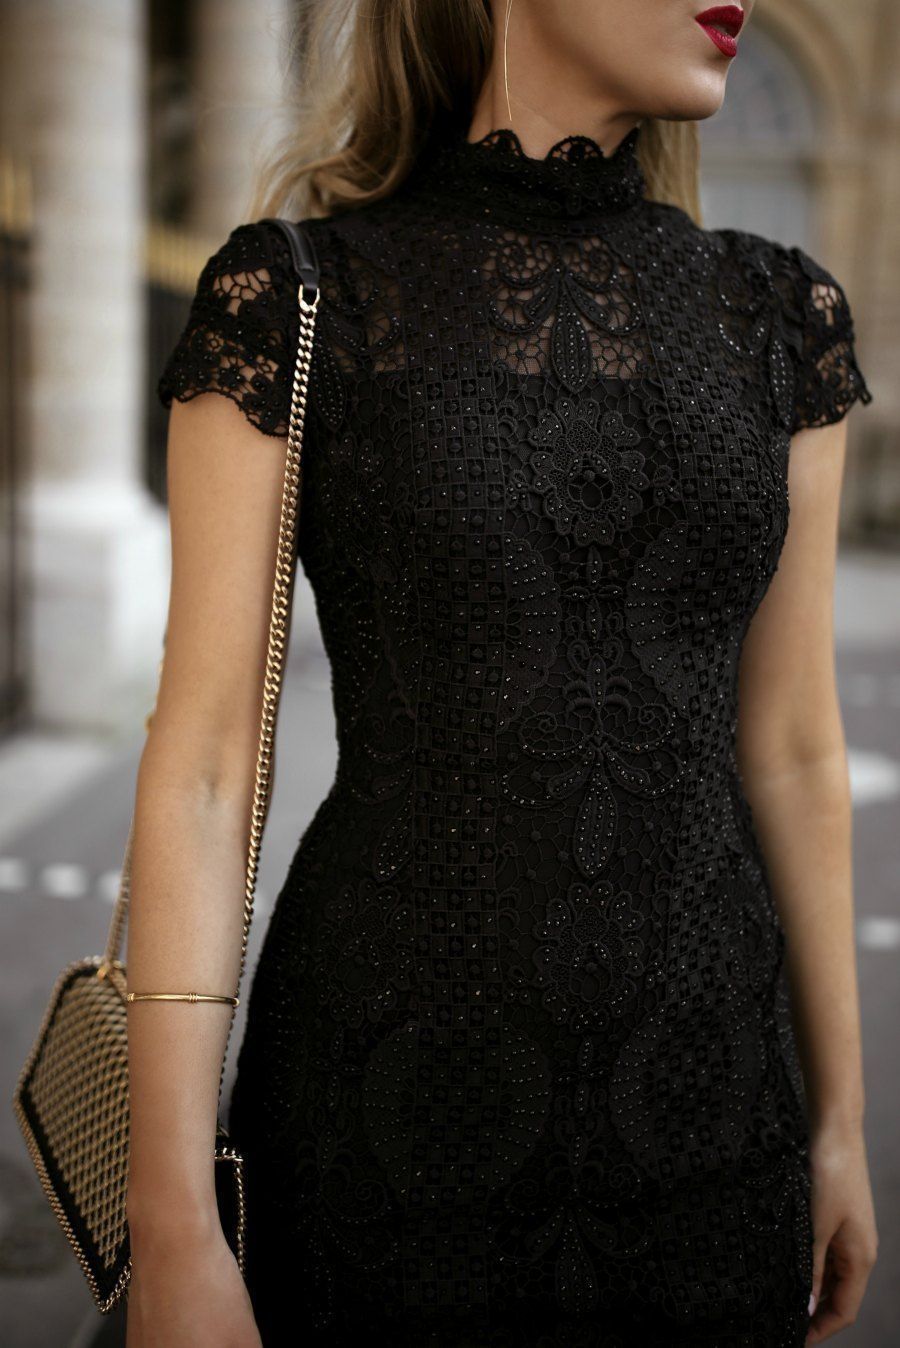 47 Beautiful Black Lace Dress Ideas To Try Right Now -   17 dress Black short ideas